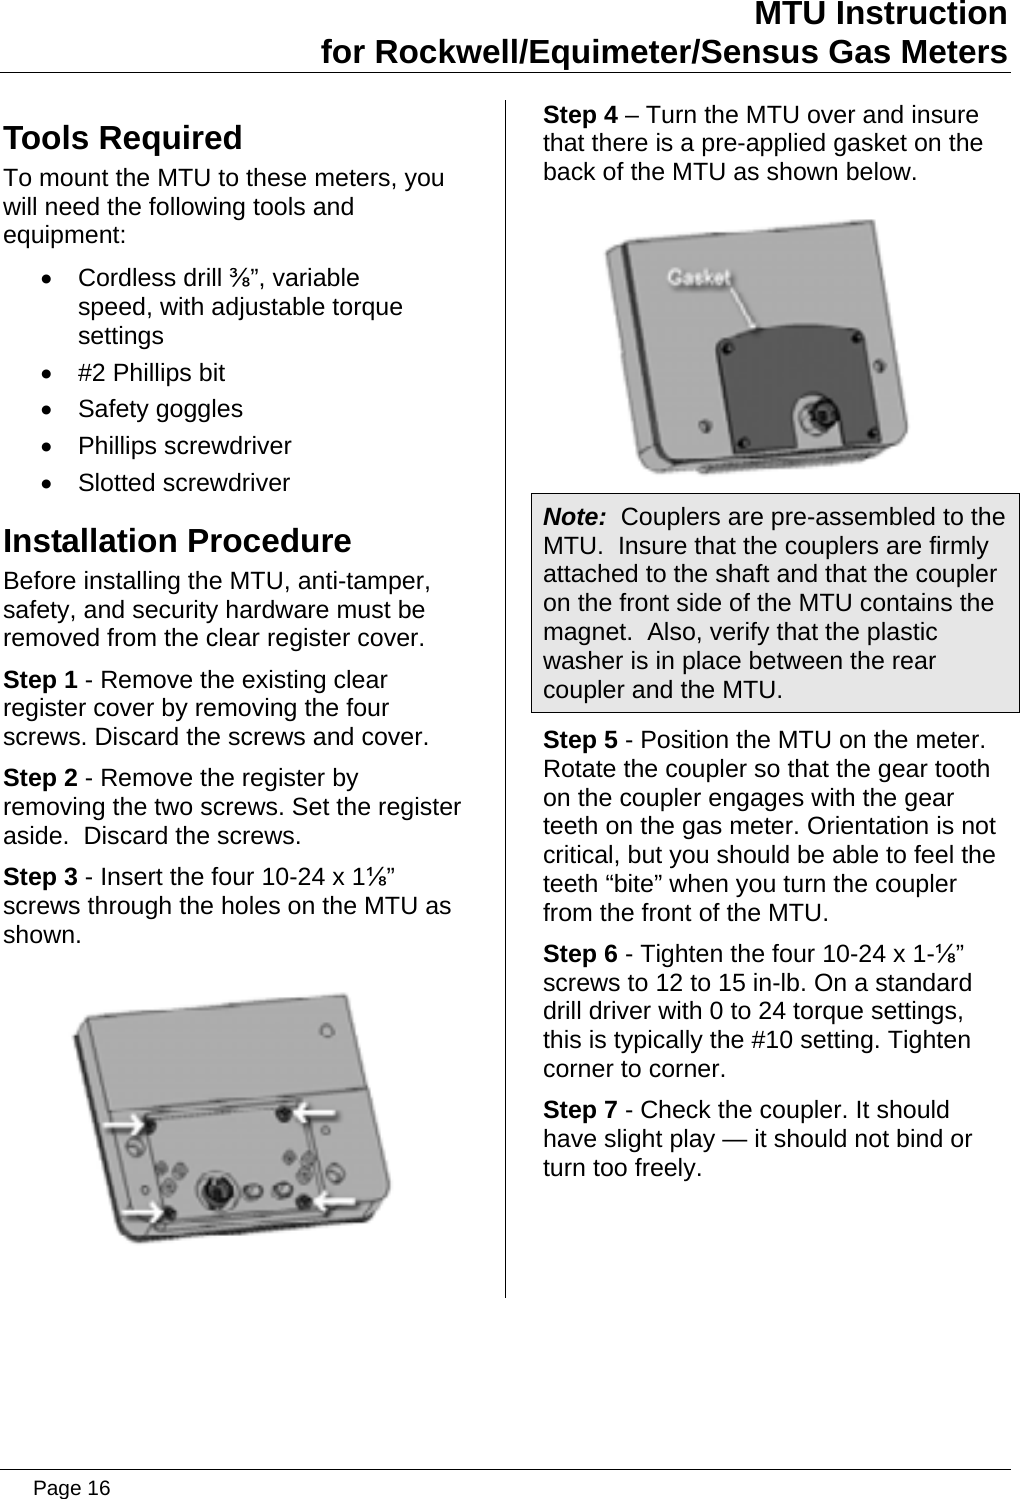 Page 16 of Aclara Technologies 09015 Transmitter for Meter Reading User Manual users manual